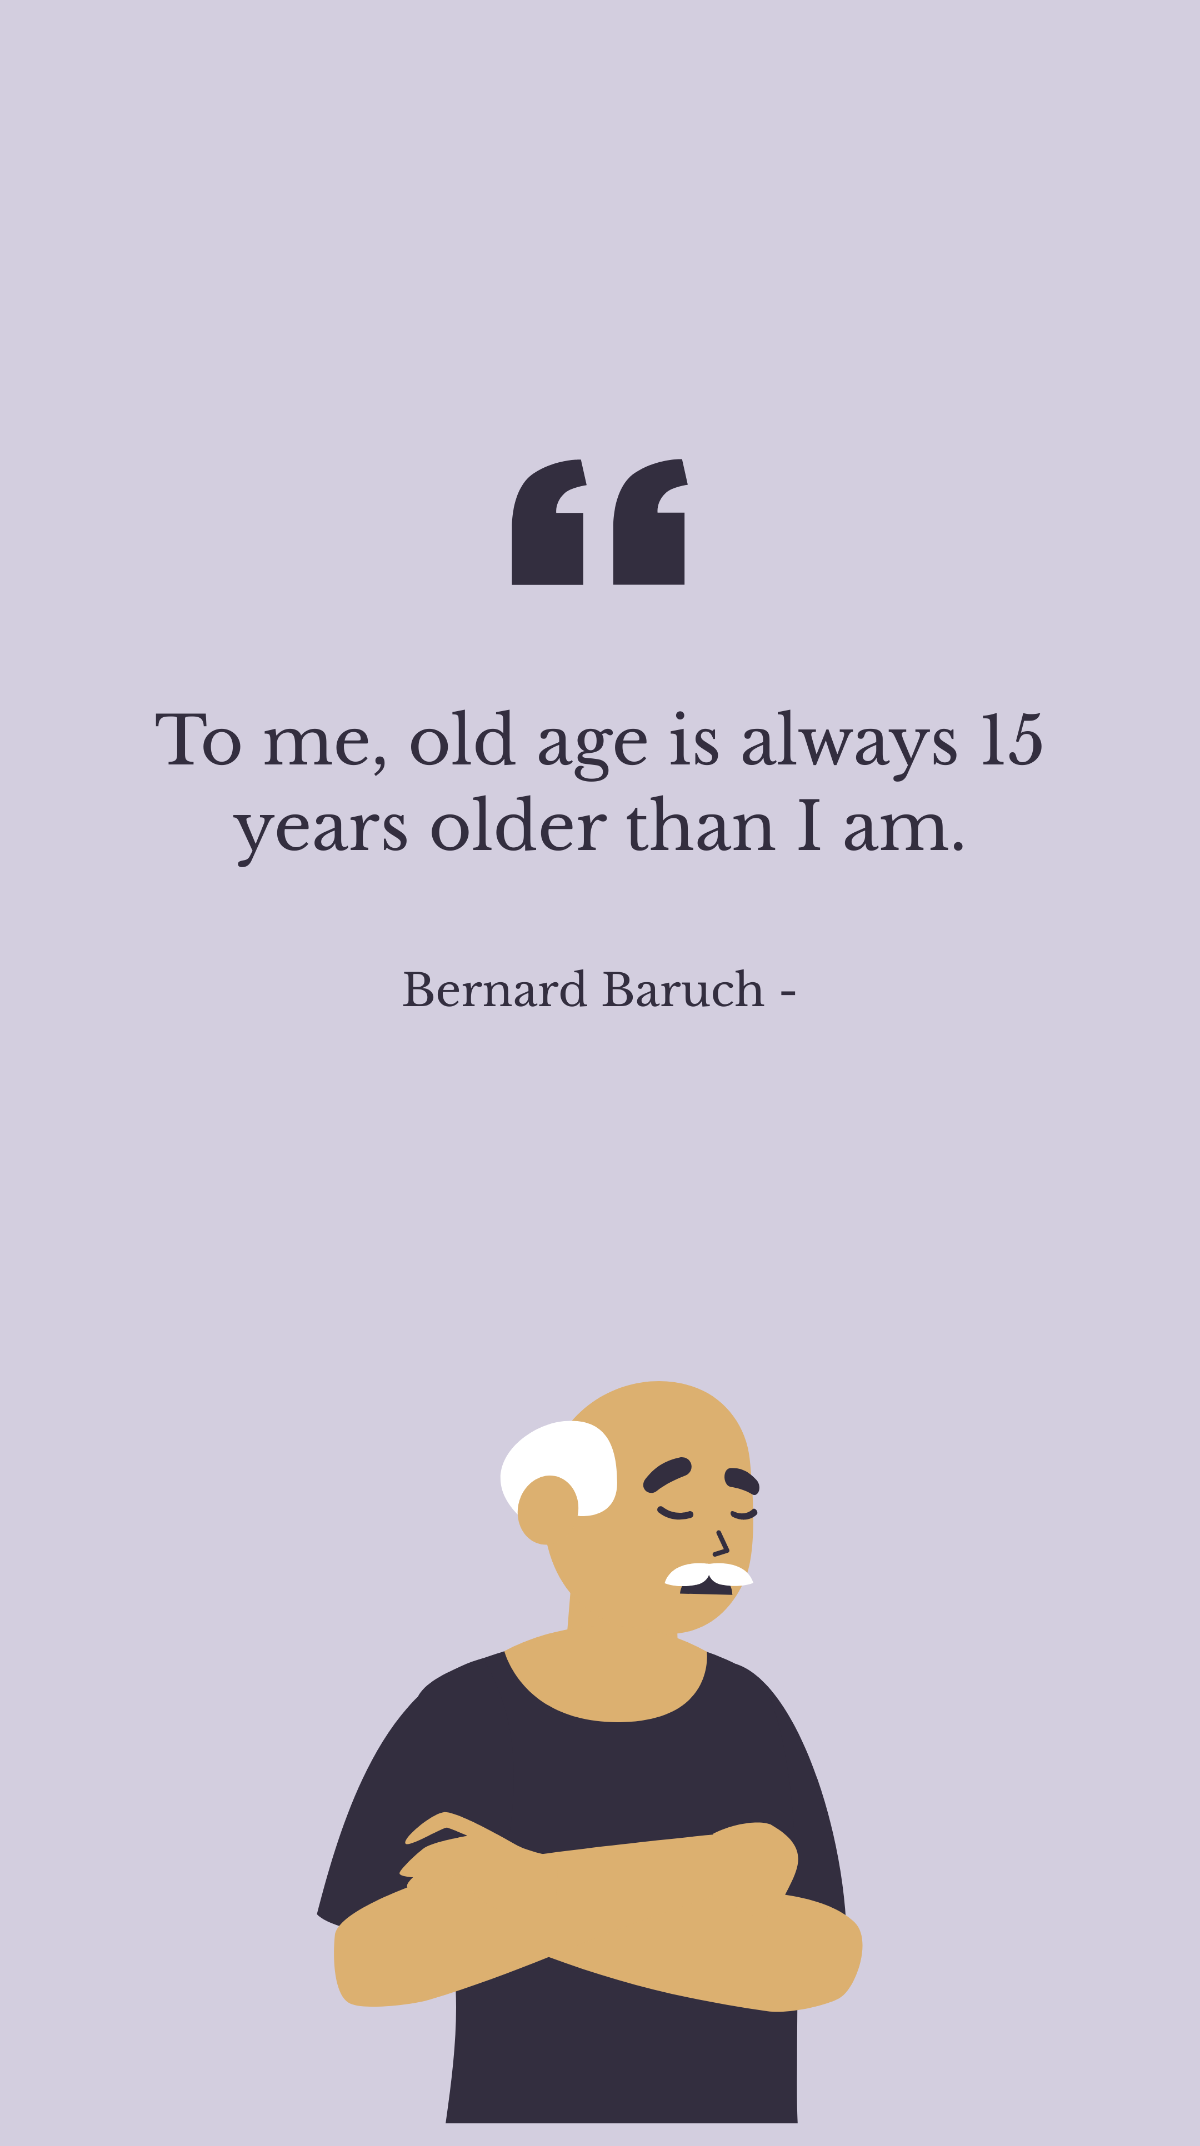 Bernard Baruch - To me, old age is always 15 years older than I am. Template